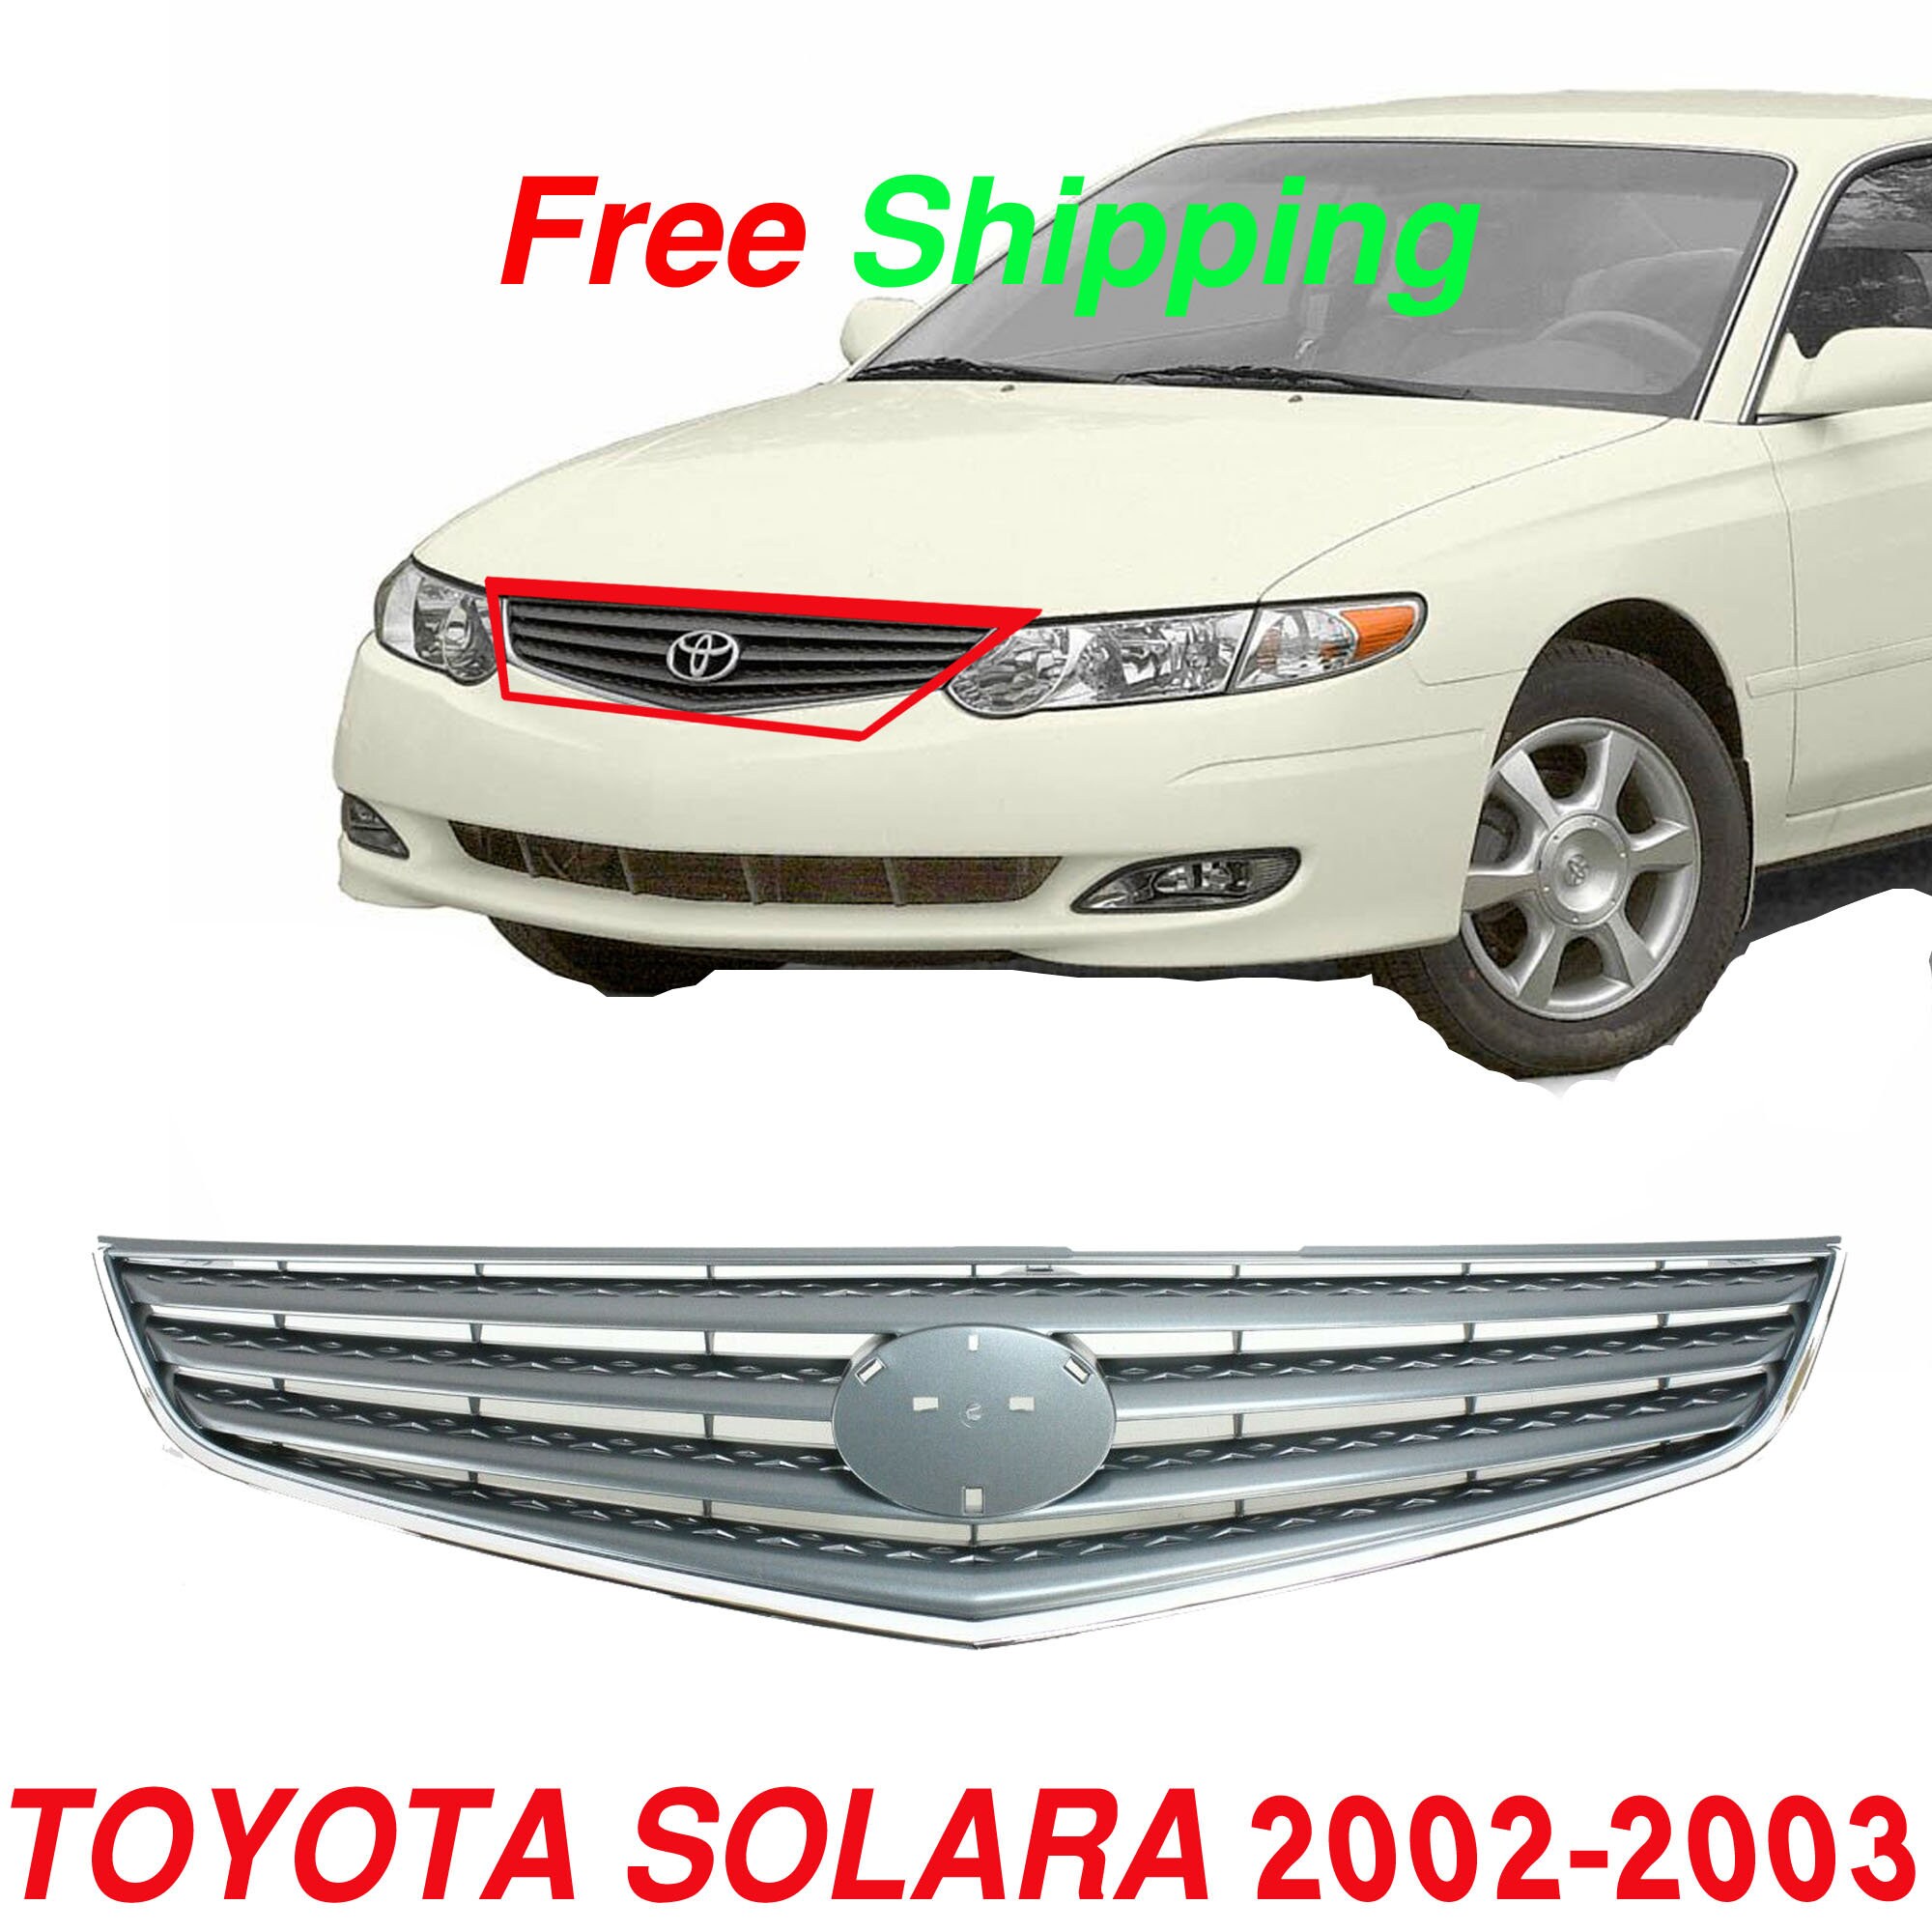 New Grille For 2002-2003 Toyota Solara Chrome Shell with Gray Insert Plastic